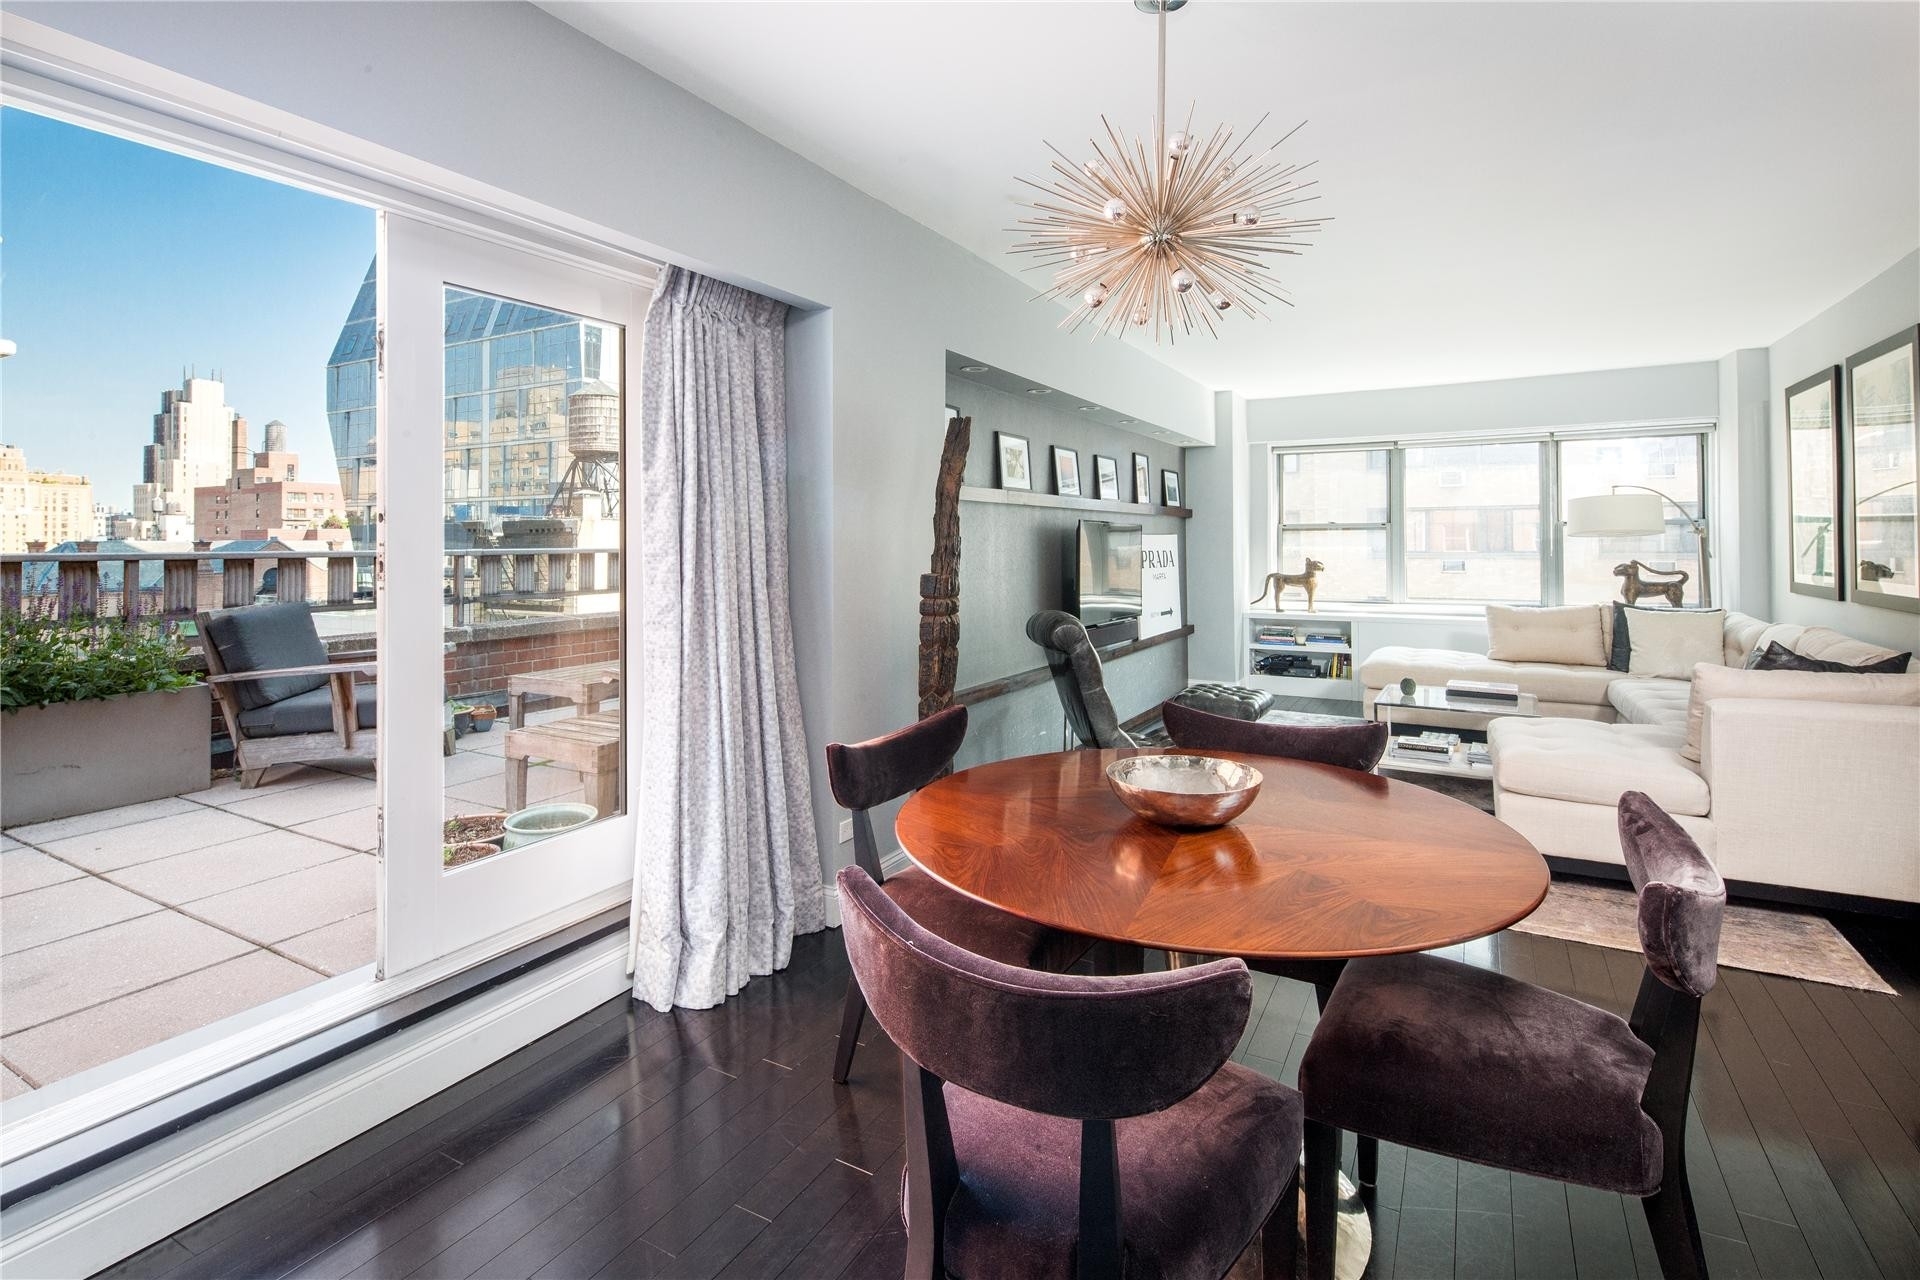 Property at The Parker Gramercy, 10 West 15th St, 1205 Flatiron District, New York